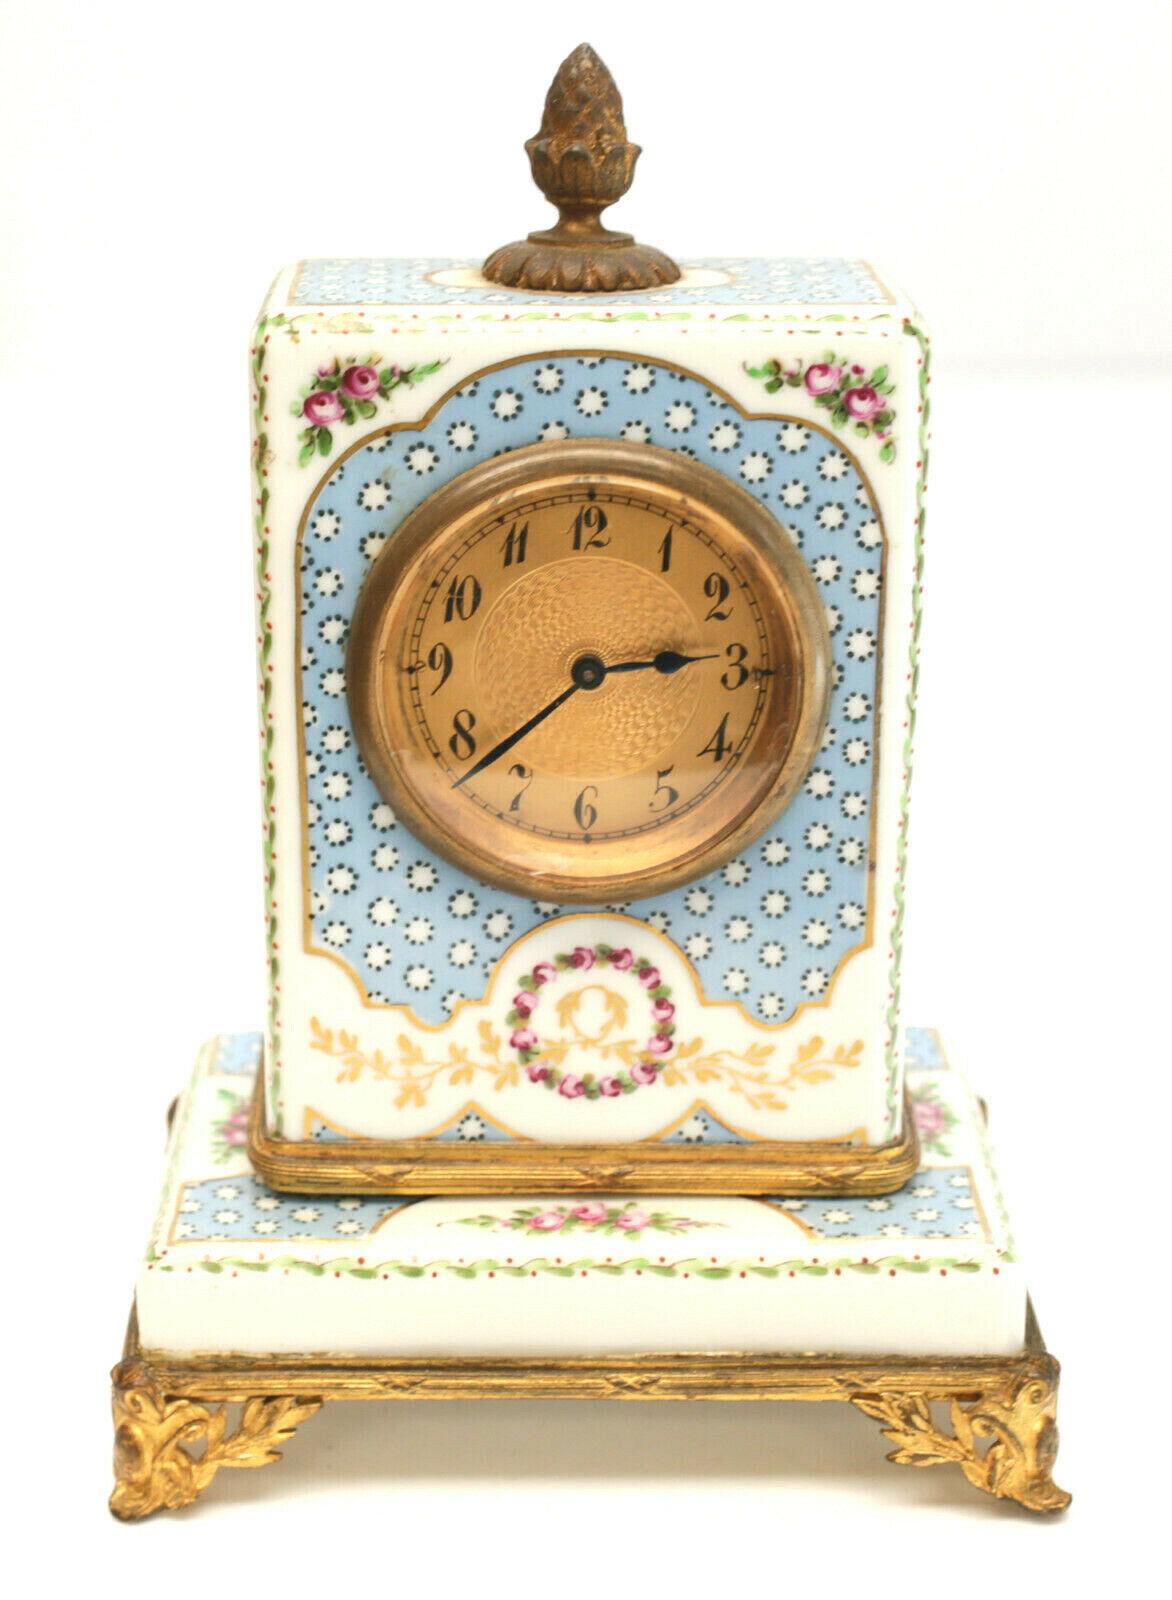 Sevres France hand painted porcelain Clock Mantel set, circa 1900

A light blue ground with darker blue dot accents throughout. Hand painted floral bouquets and gilt laurel leaf decorations to the edges. Gilt bronze mounts. Sevres mark to the